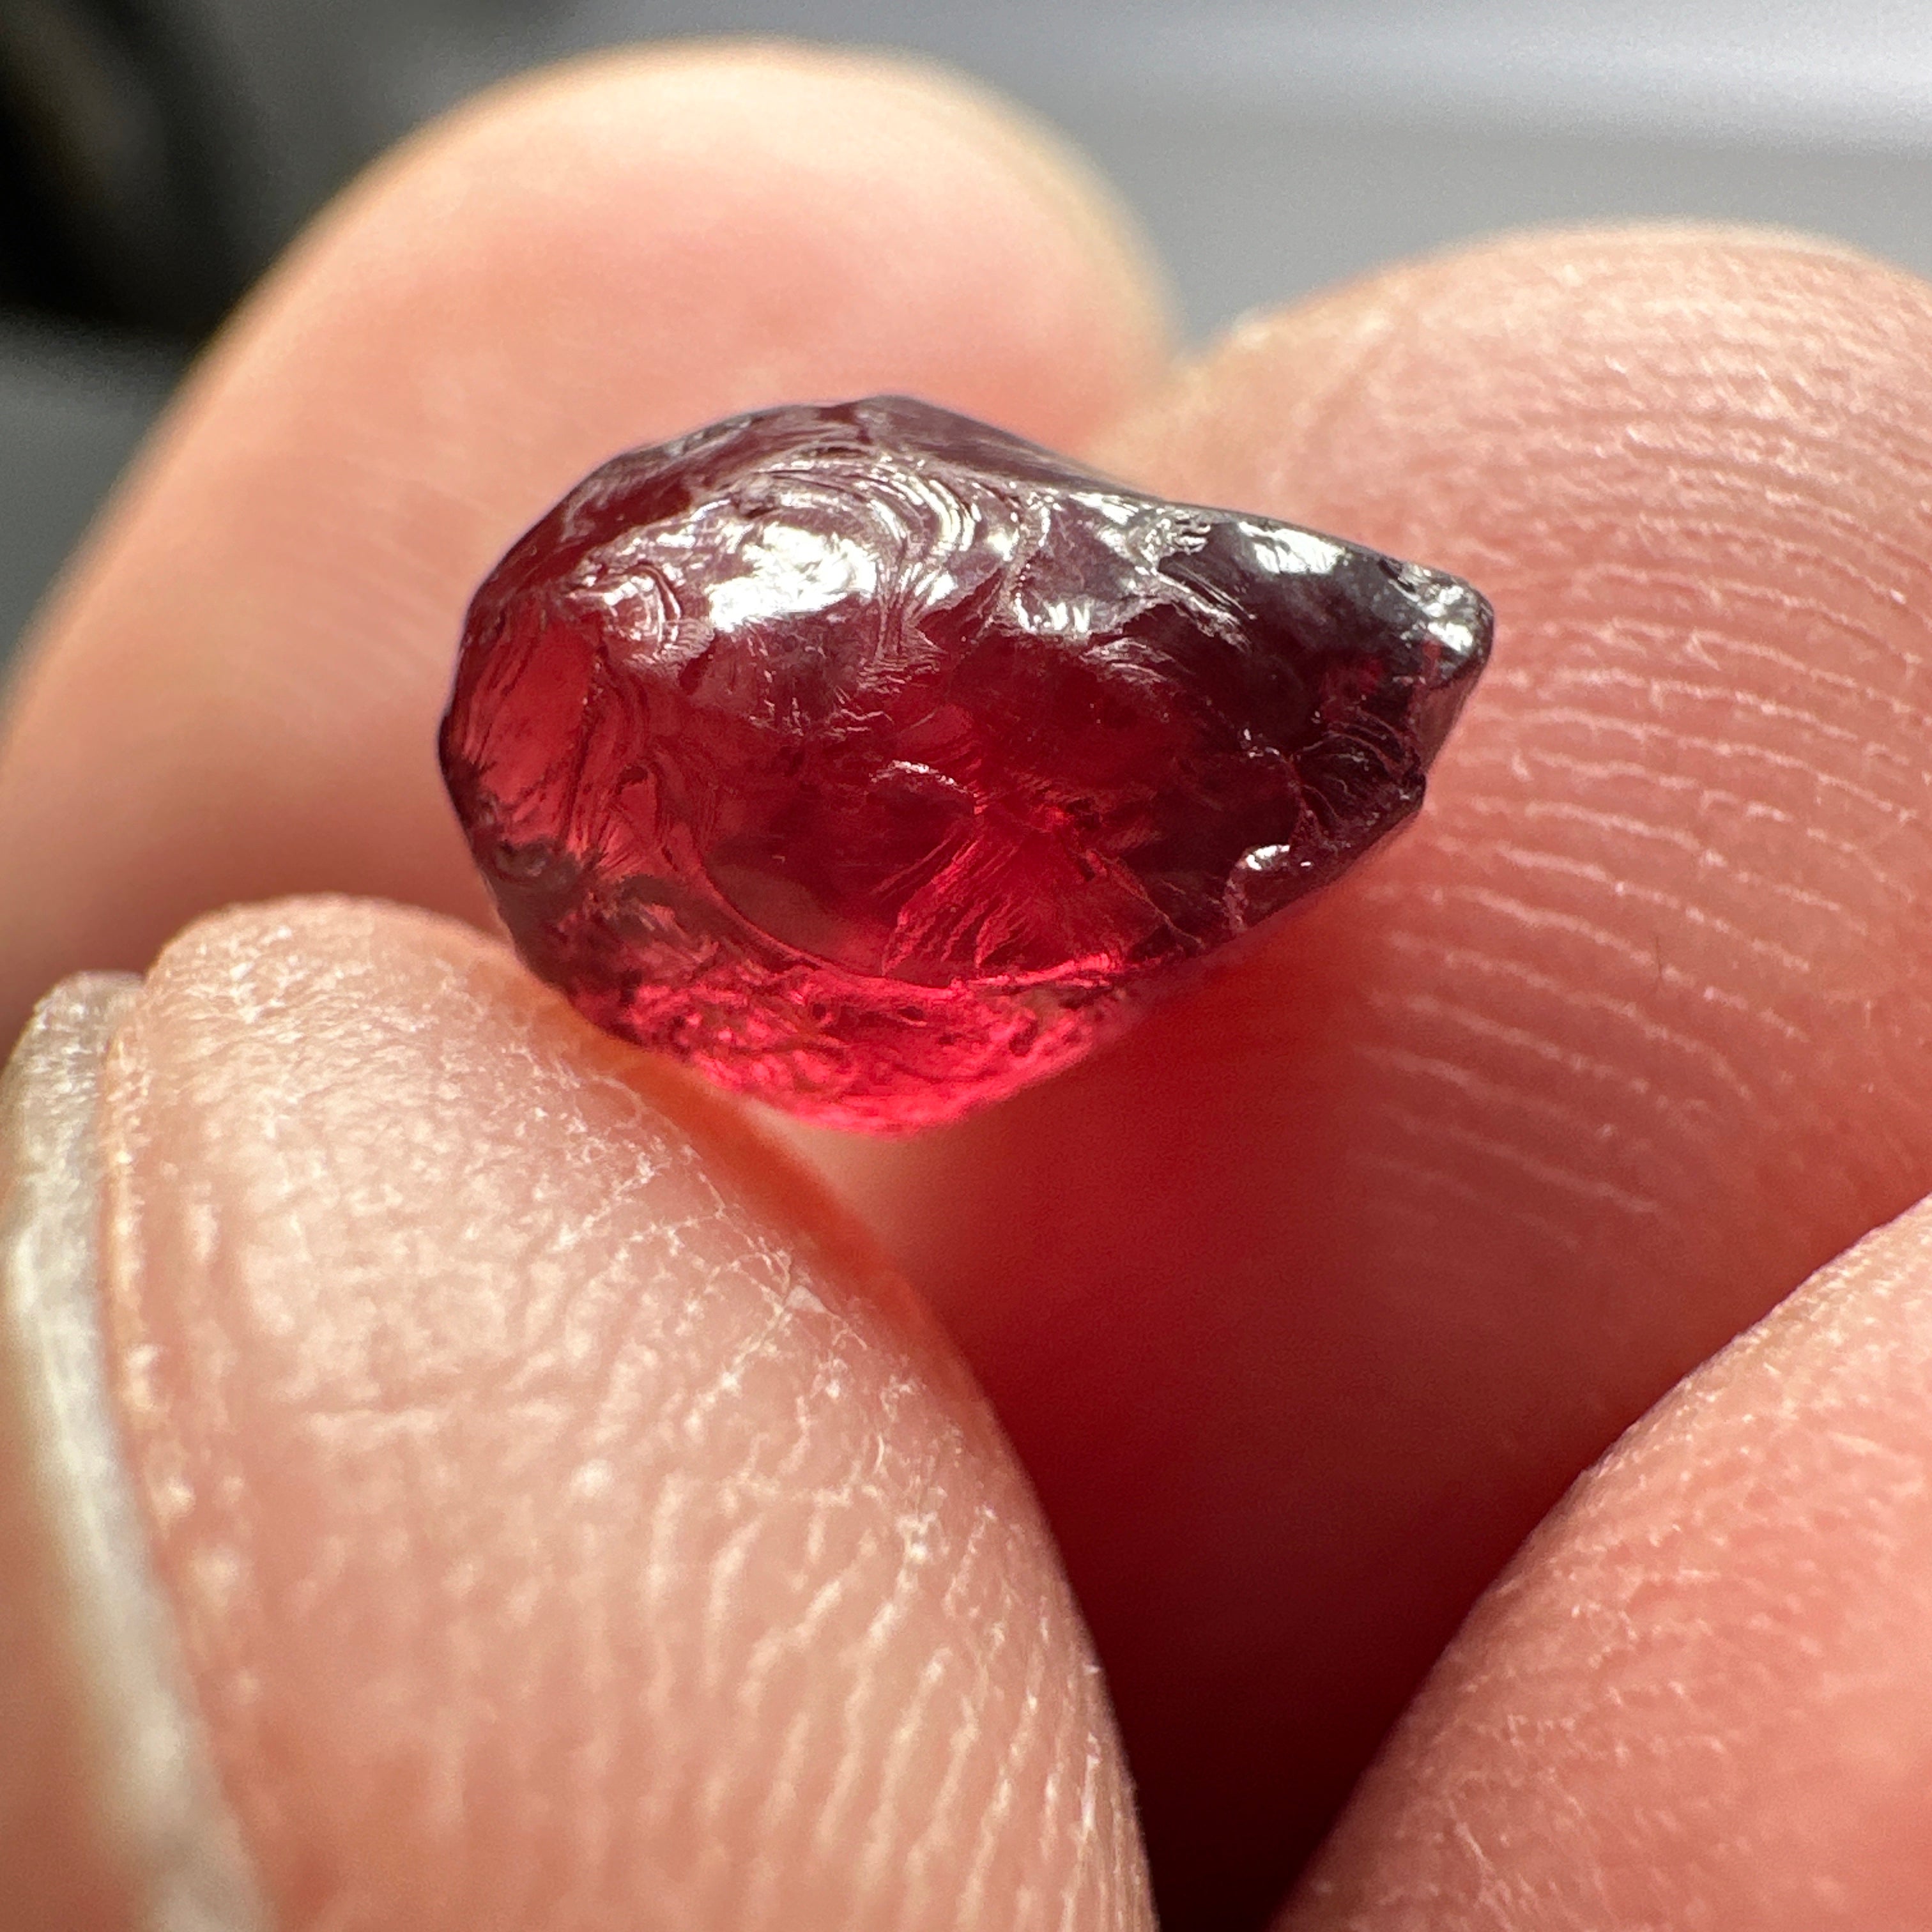 3.26ct Rhodolite Garnet, Tanzania, Untreated Unheated, slightly silky and a small inclusion coming in on the outside